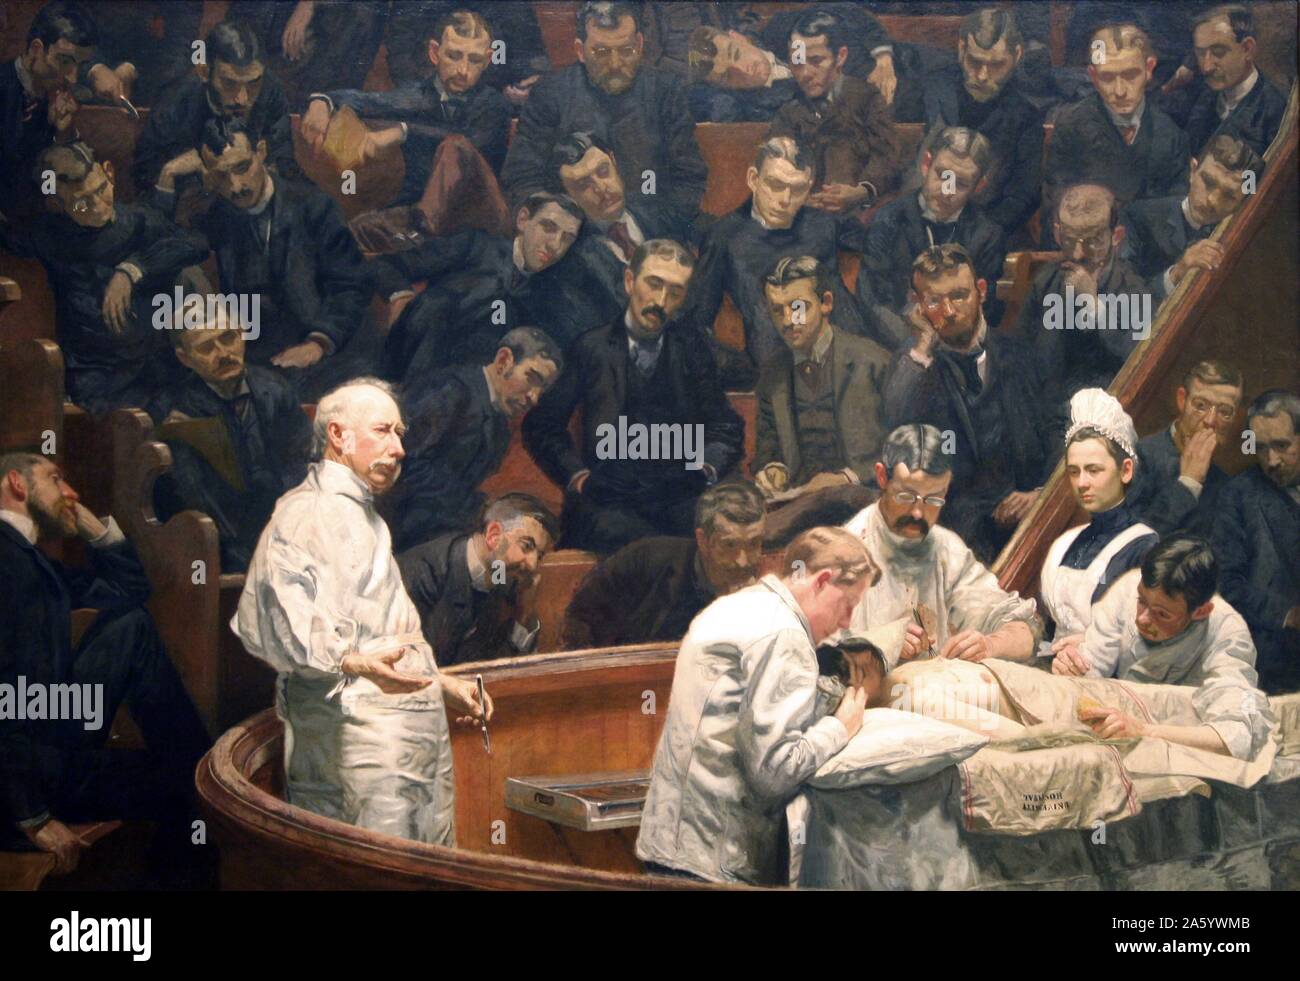 The Agnew Clinic, or, The Clinic of Dr. Agnew, is an 1889 oil painting by American artist Thomas Eakins, 1844-1916. It was commissioned to honour anatomist and surgeon David Hayes Agnew, on his retirement from teaching at the University of Pennsylvania. Stock Photo